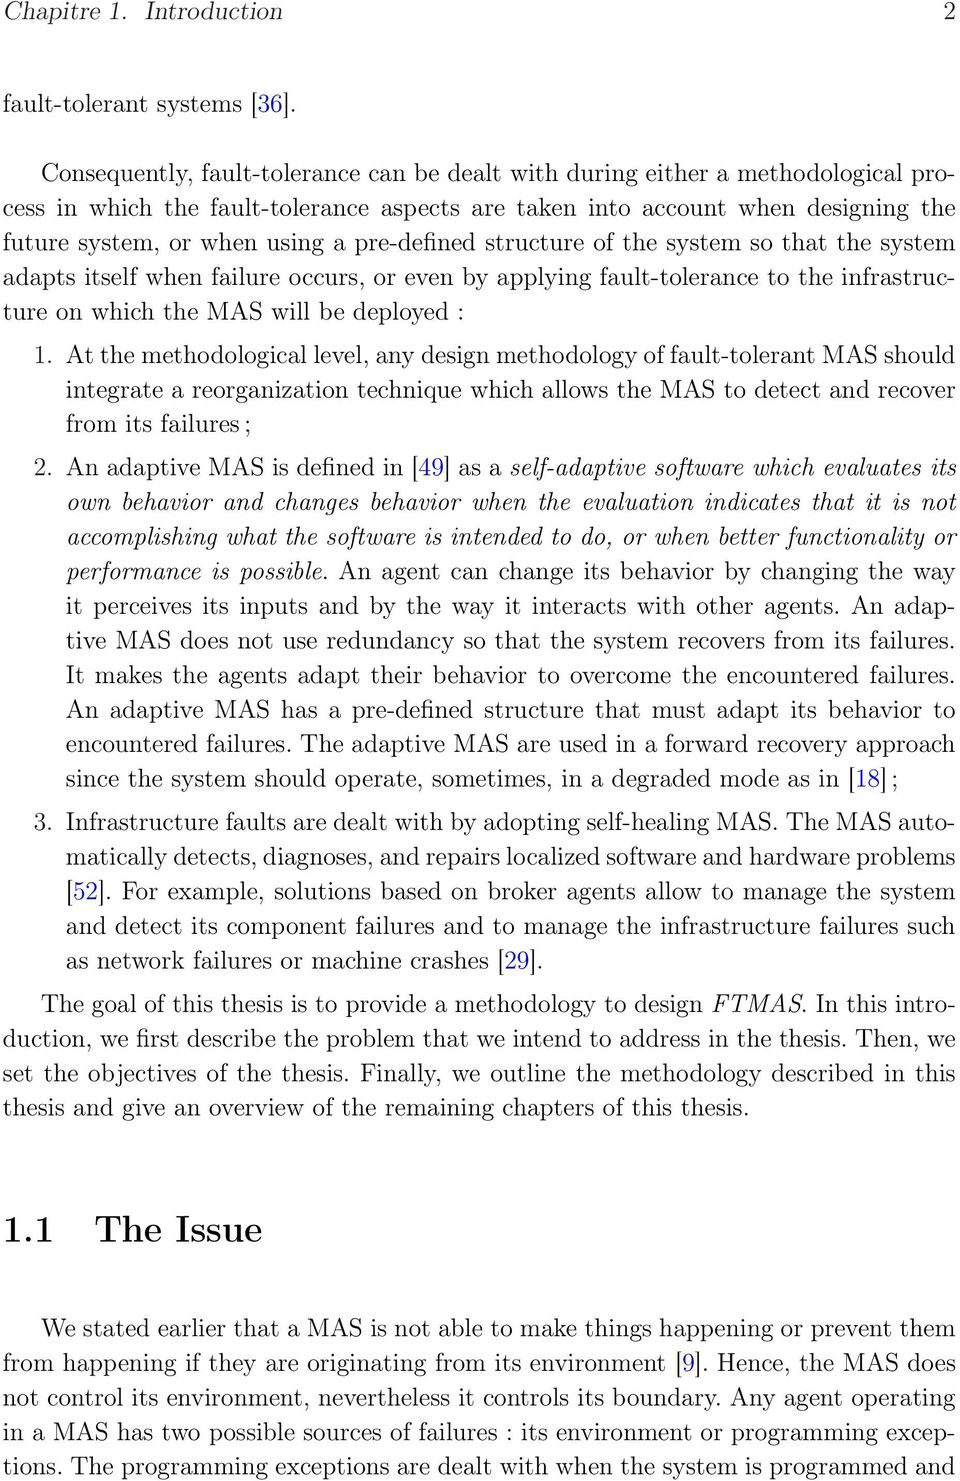 pre-defined structure of the system so that the system adapts itself when failure occurs, or even by applying fault-tolerance to the infrastructure on which the MAS will be deployed : 1.